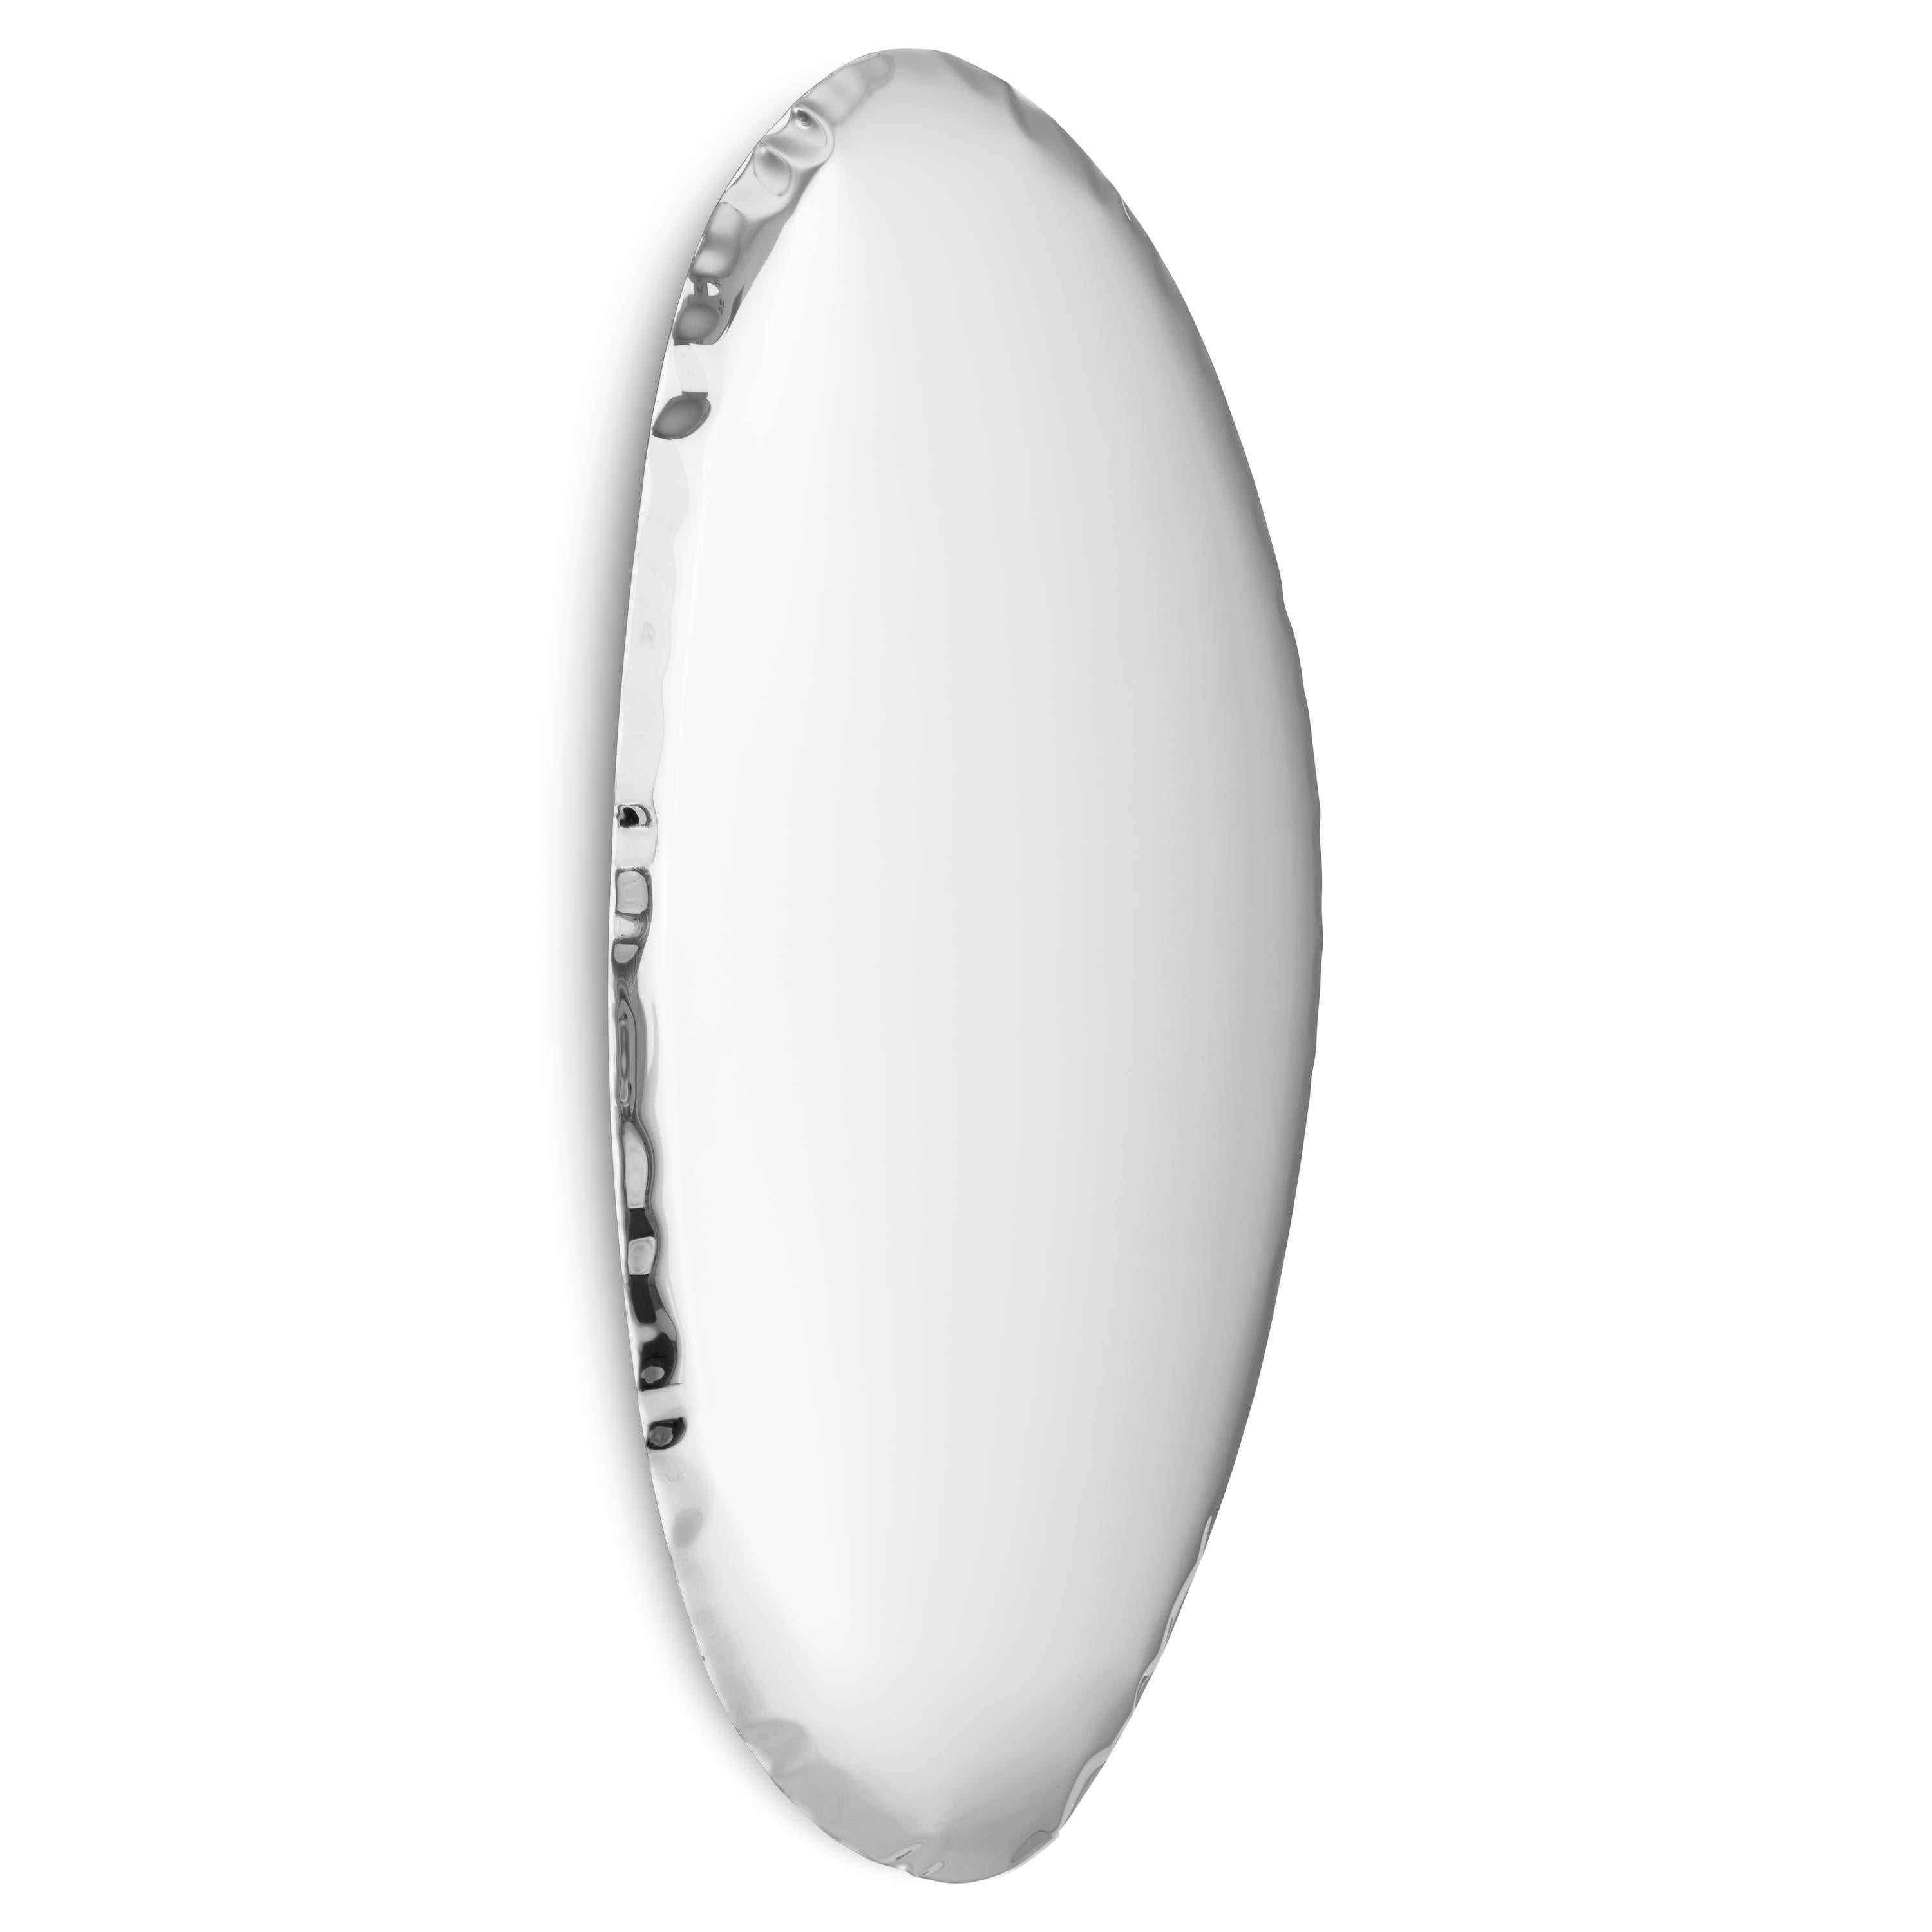 Stainless Steel Tafla O4 wall mirror by Zieta
Dimensions: D 6 x W 64 x H 123 cm 
Material: Stainless steel
Finish: Polished. 
Available finishes: Stainless Steel, White Matt, Sapphire/Emerald, Sapphire, Emerald, Deep space blue, Dark matter, or red